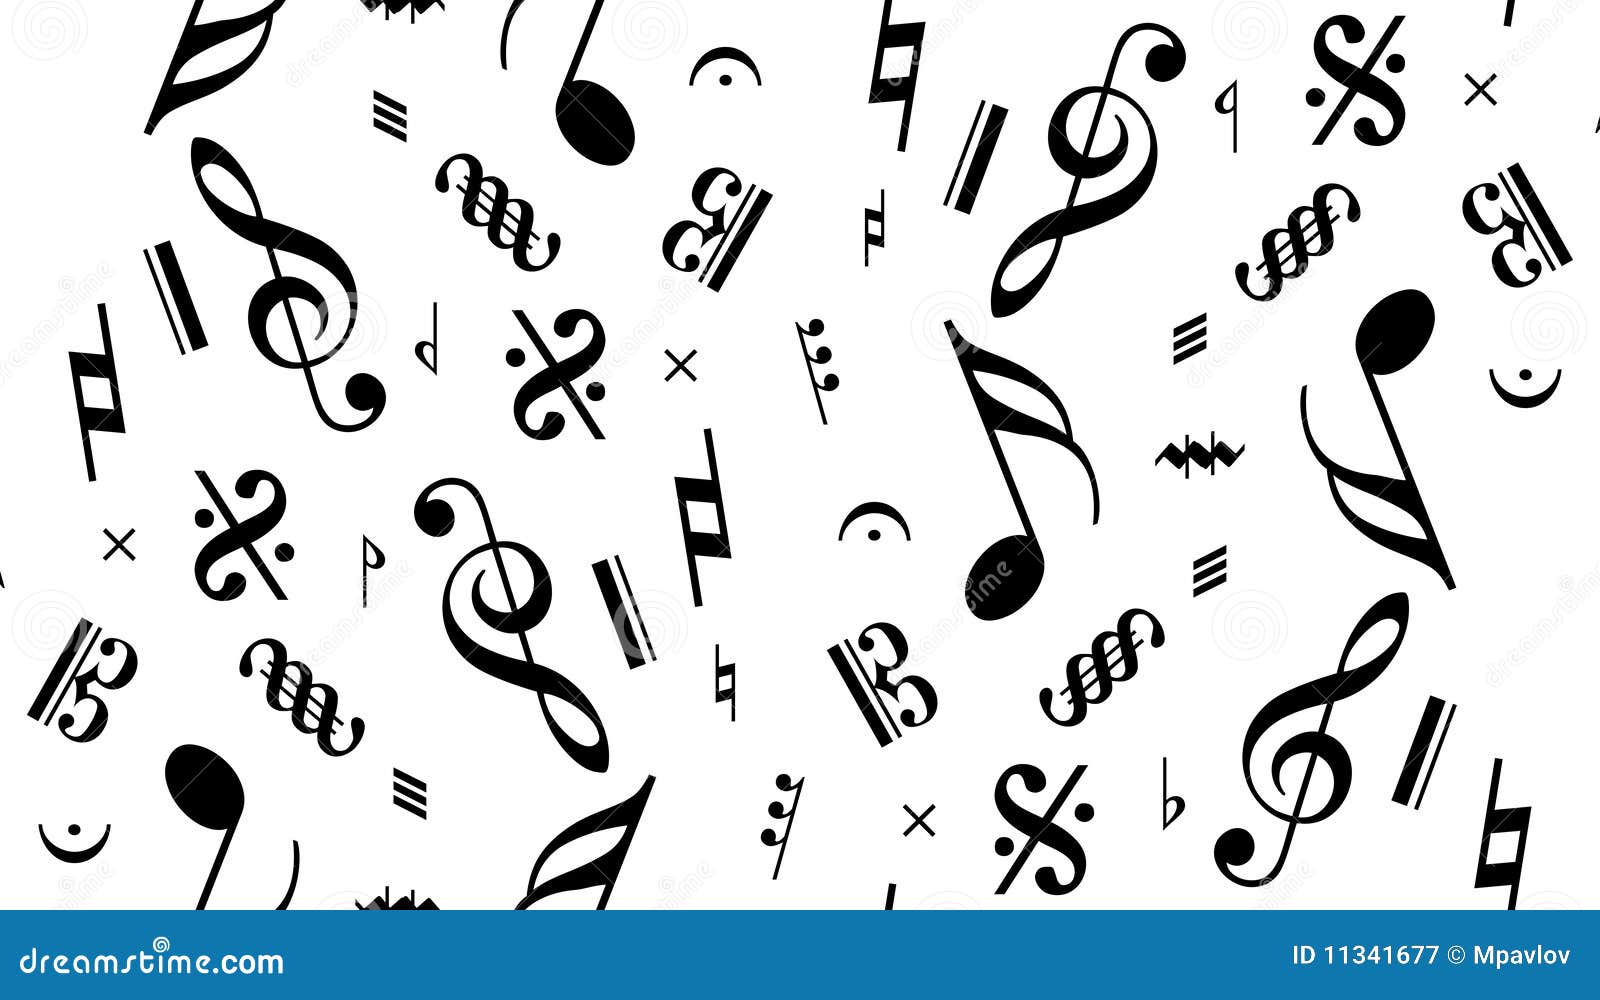 Vector Music Note Seamless Royalty Free Stock Photography - Image: 11341677